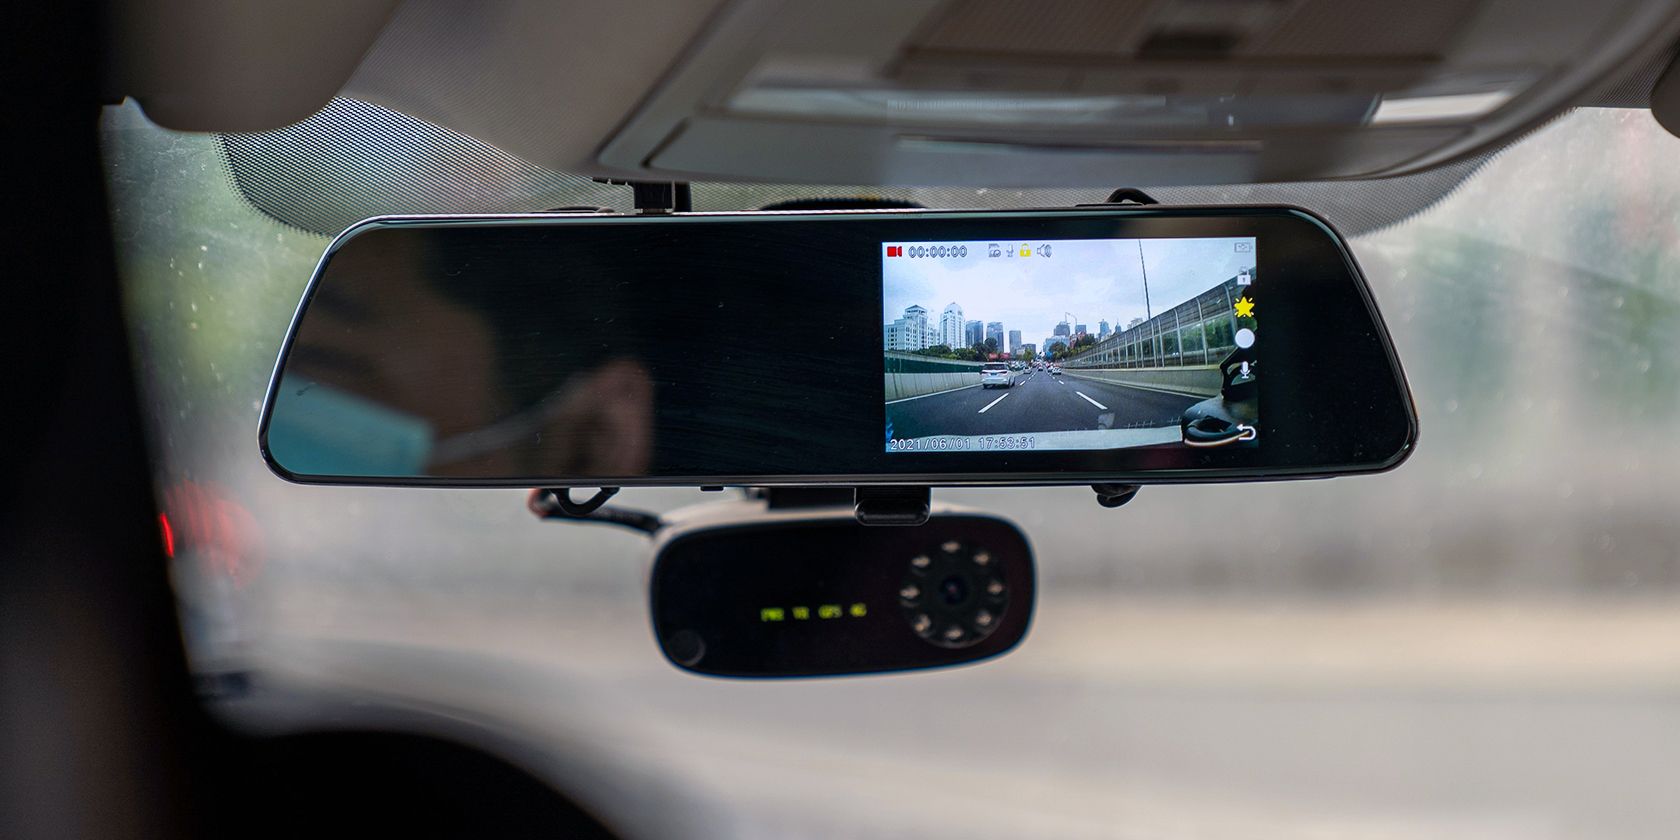 https://static1.makeuseofimages.com/wordpress/wp-content/uploads/2022/02/dashcam-mounted-on-a-rearview-mirror.jpg